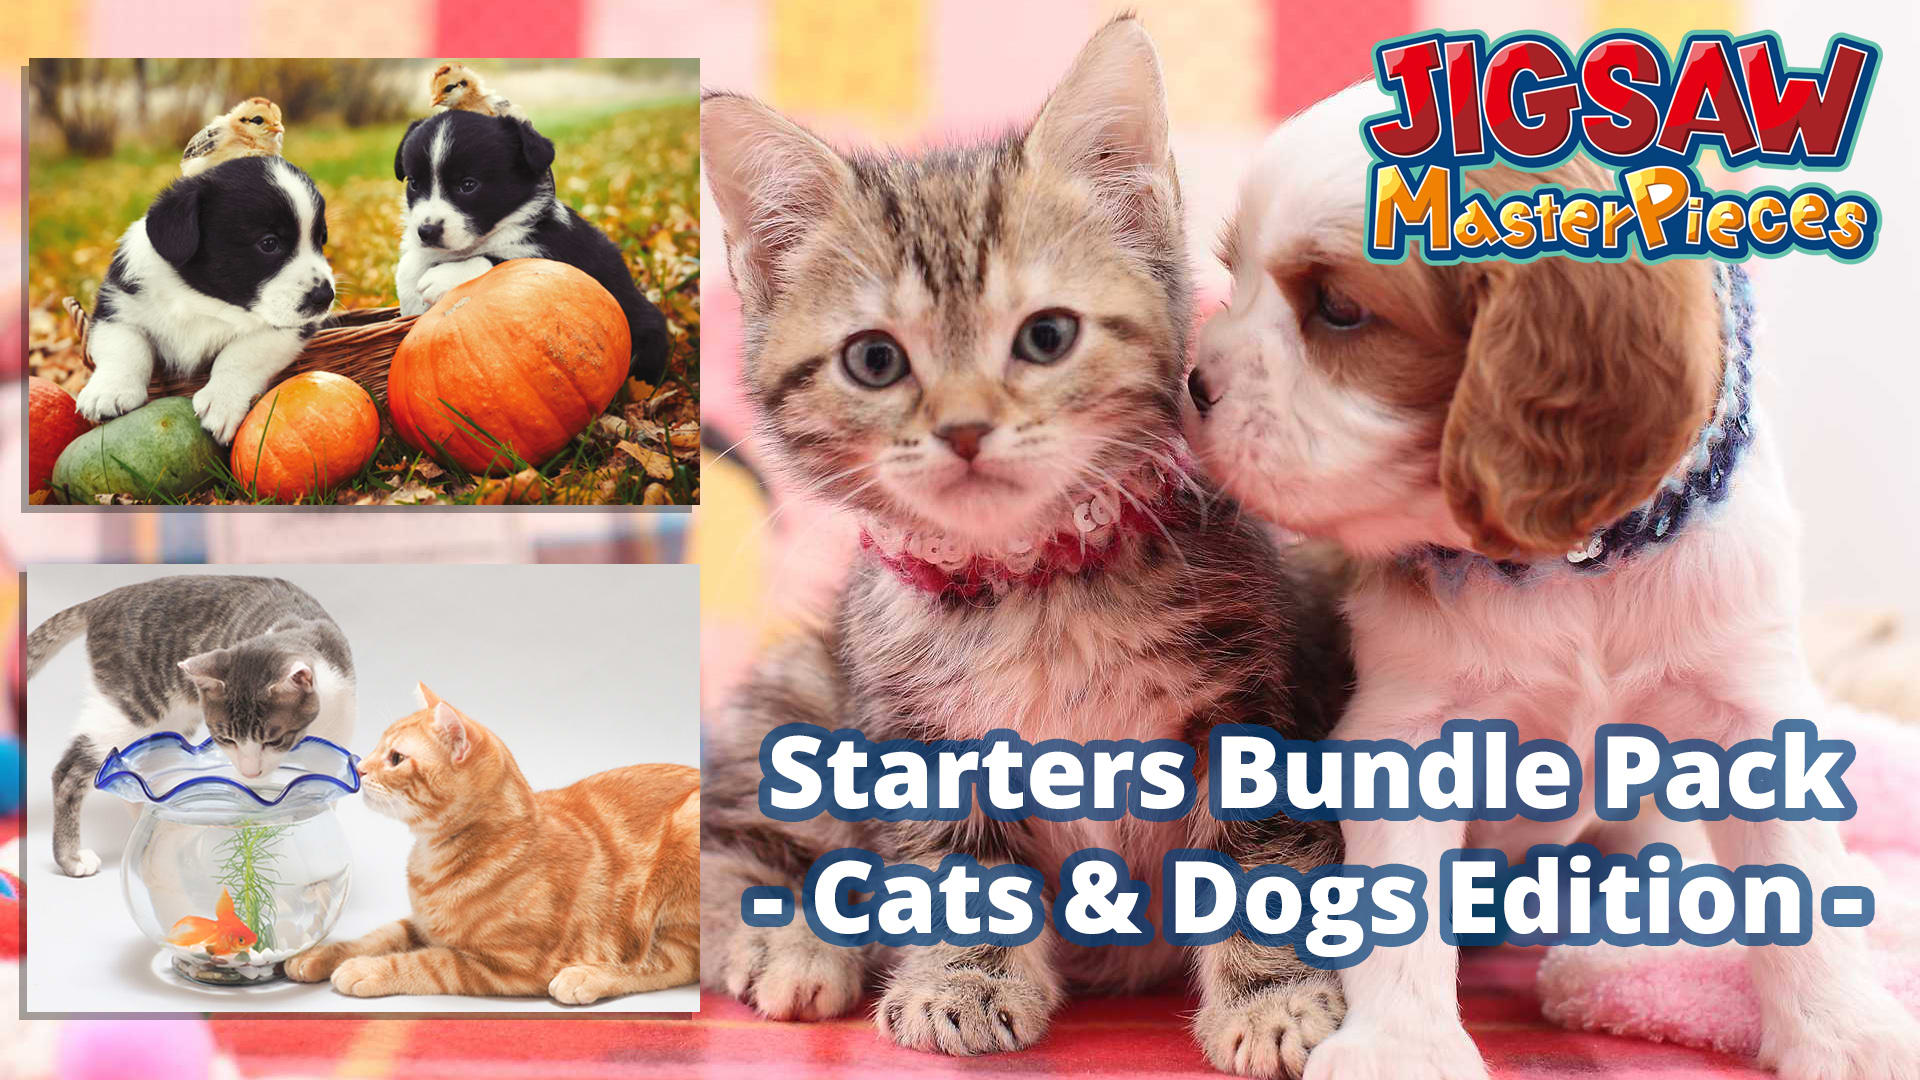 Jigsaw Masterpieces Starters Bundle Pack  - Cats & Dogs Edition -